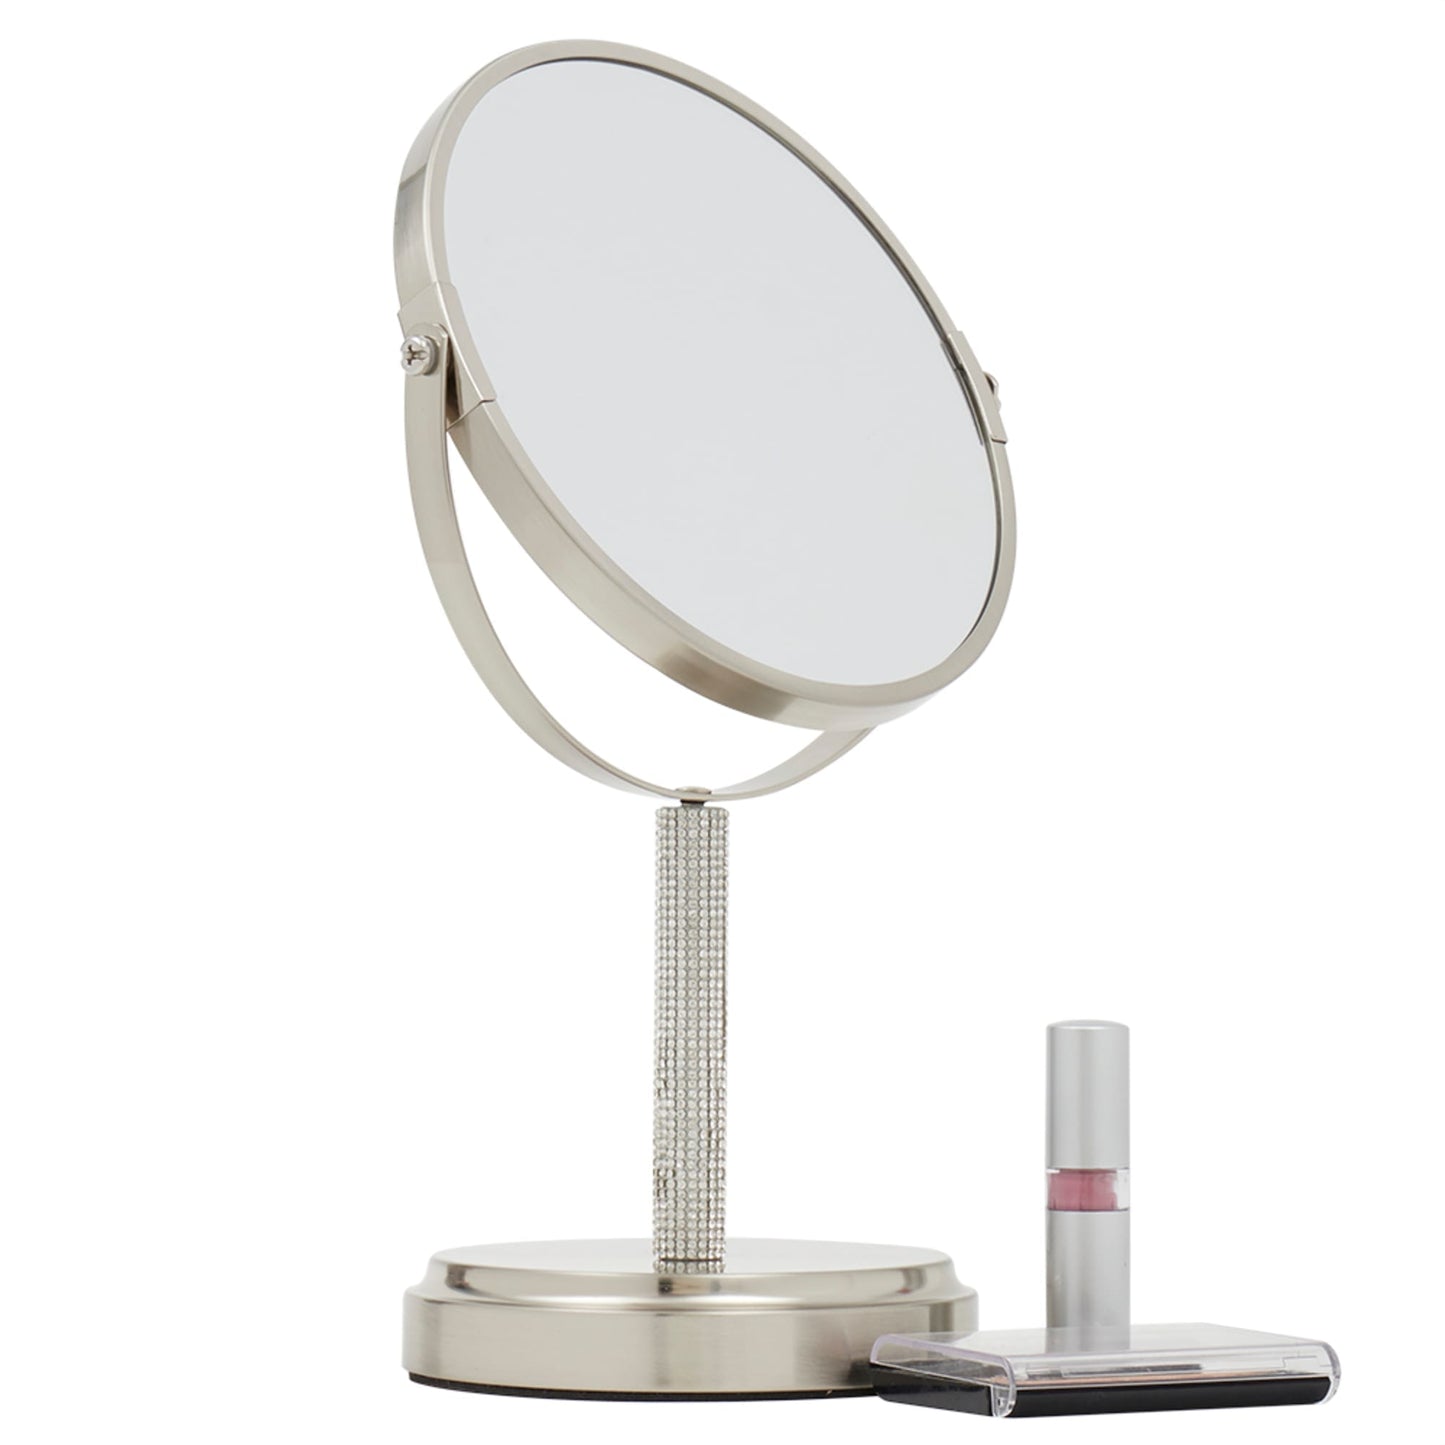 Diamond Double Sided Cosmetic Mirror, (1x/5x Magnification), Satin Nickel